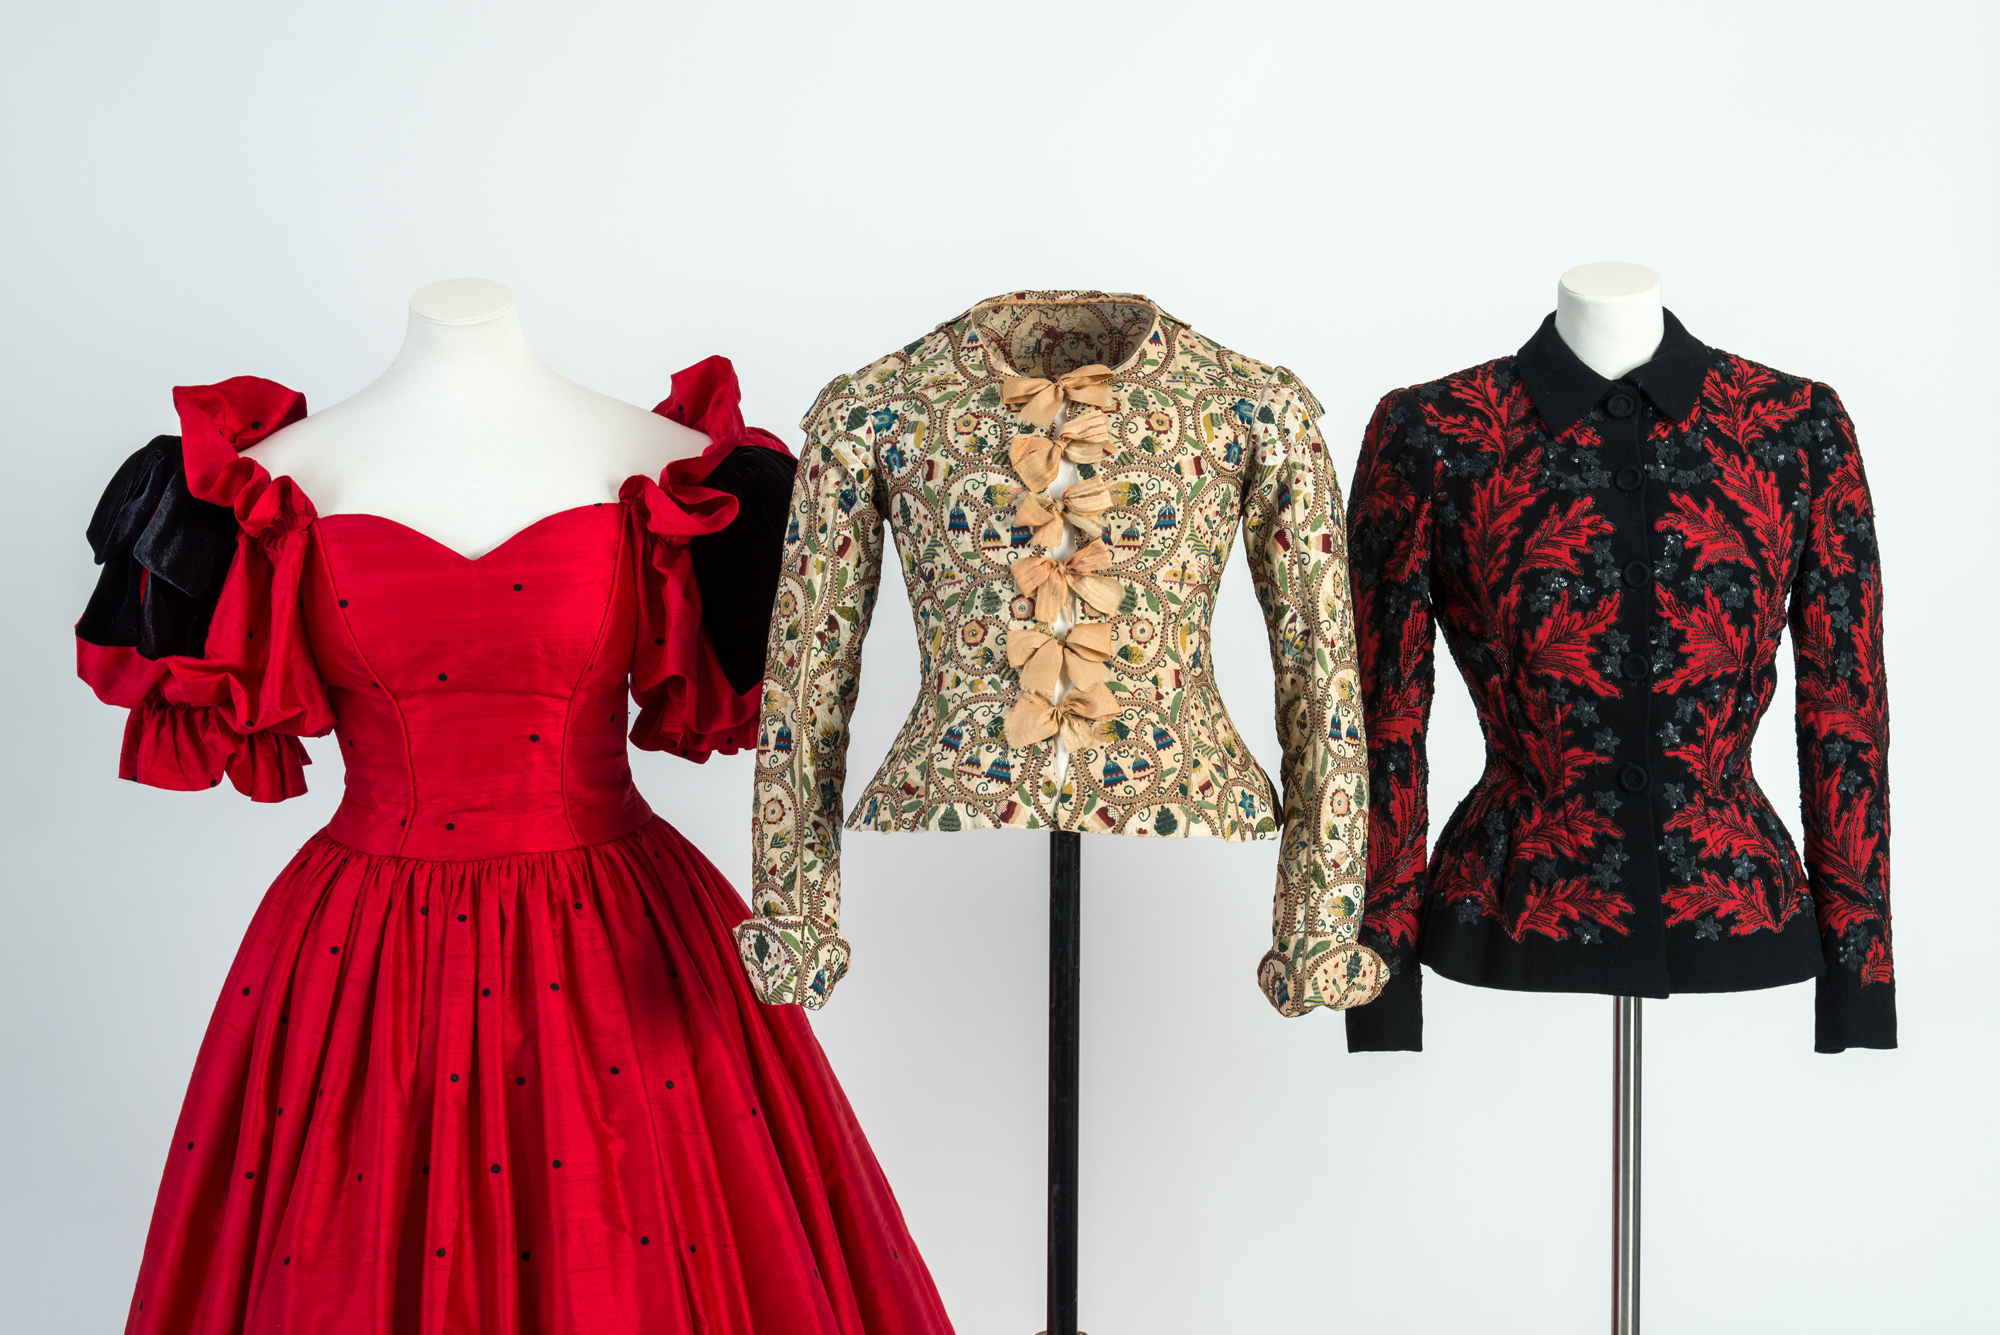 Image: Garments from A History of Fashion in 100 Objects